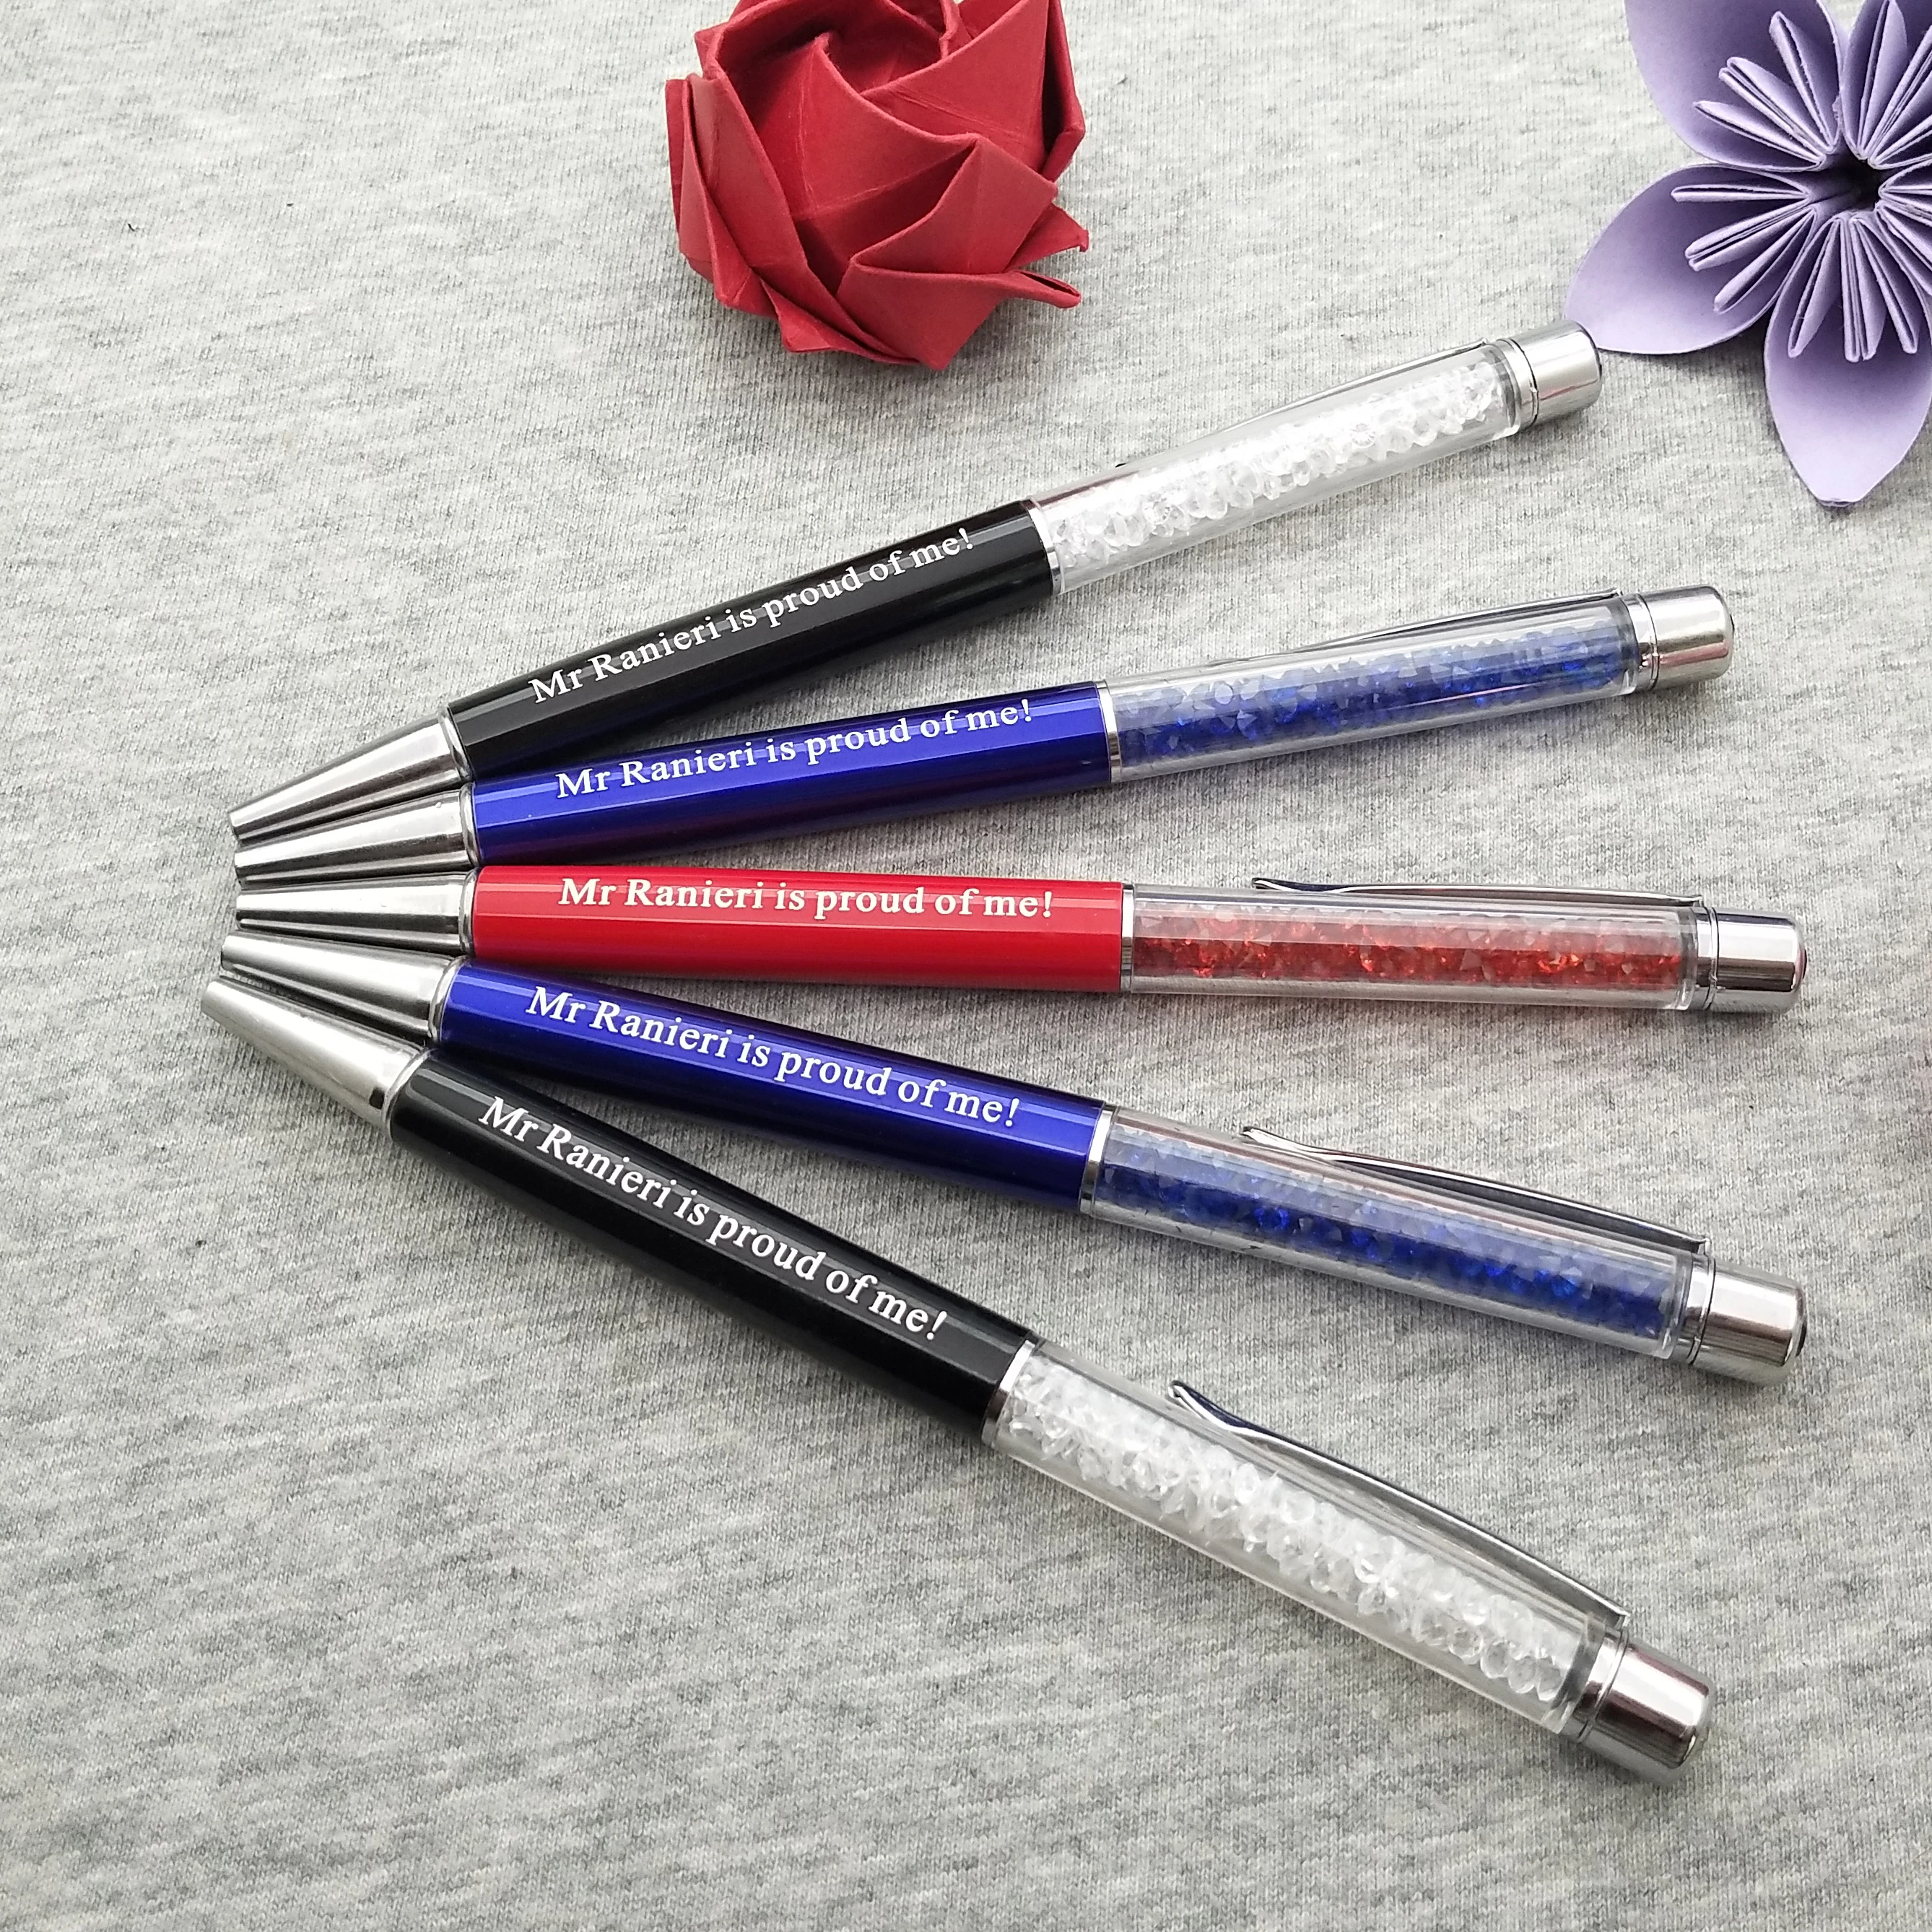 Fashion wedding crystal ballpoint pen wedding gift pen with diamonds 10colors customized with your wedding date/name 30pcs a lot